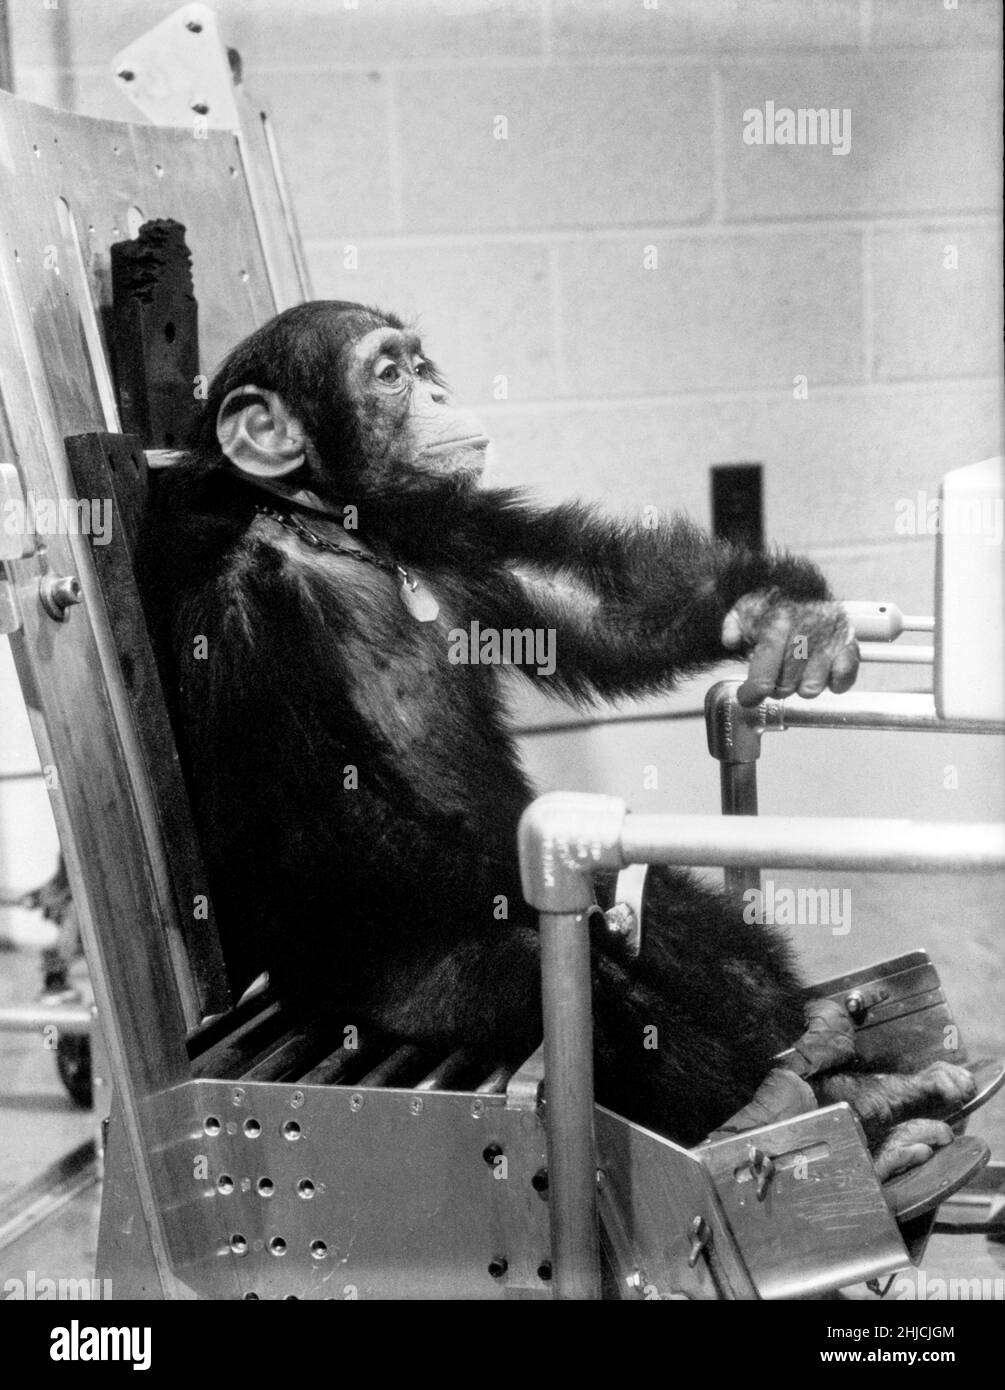 Chimpanzee Ham during preflight activity with one of his handlers prior to the Mercury-Redstone 2 test flight. On January 31, 1961, a Mercury-Redstone launch from Cape Canaveral carried the chimpanzee, Ham, over 400 miles down range in an arching trajectory that reached a peak of 158 miles above the Earth. The mission was successful and Ham performed his lever-pulling task well in response to the flashing light. NASA used chimpanzees and other primates to test the Mercury capsule before launching the first American astronaut Alan Shepard in May 1961. Stock Photo